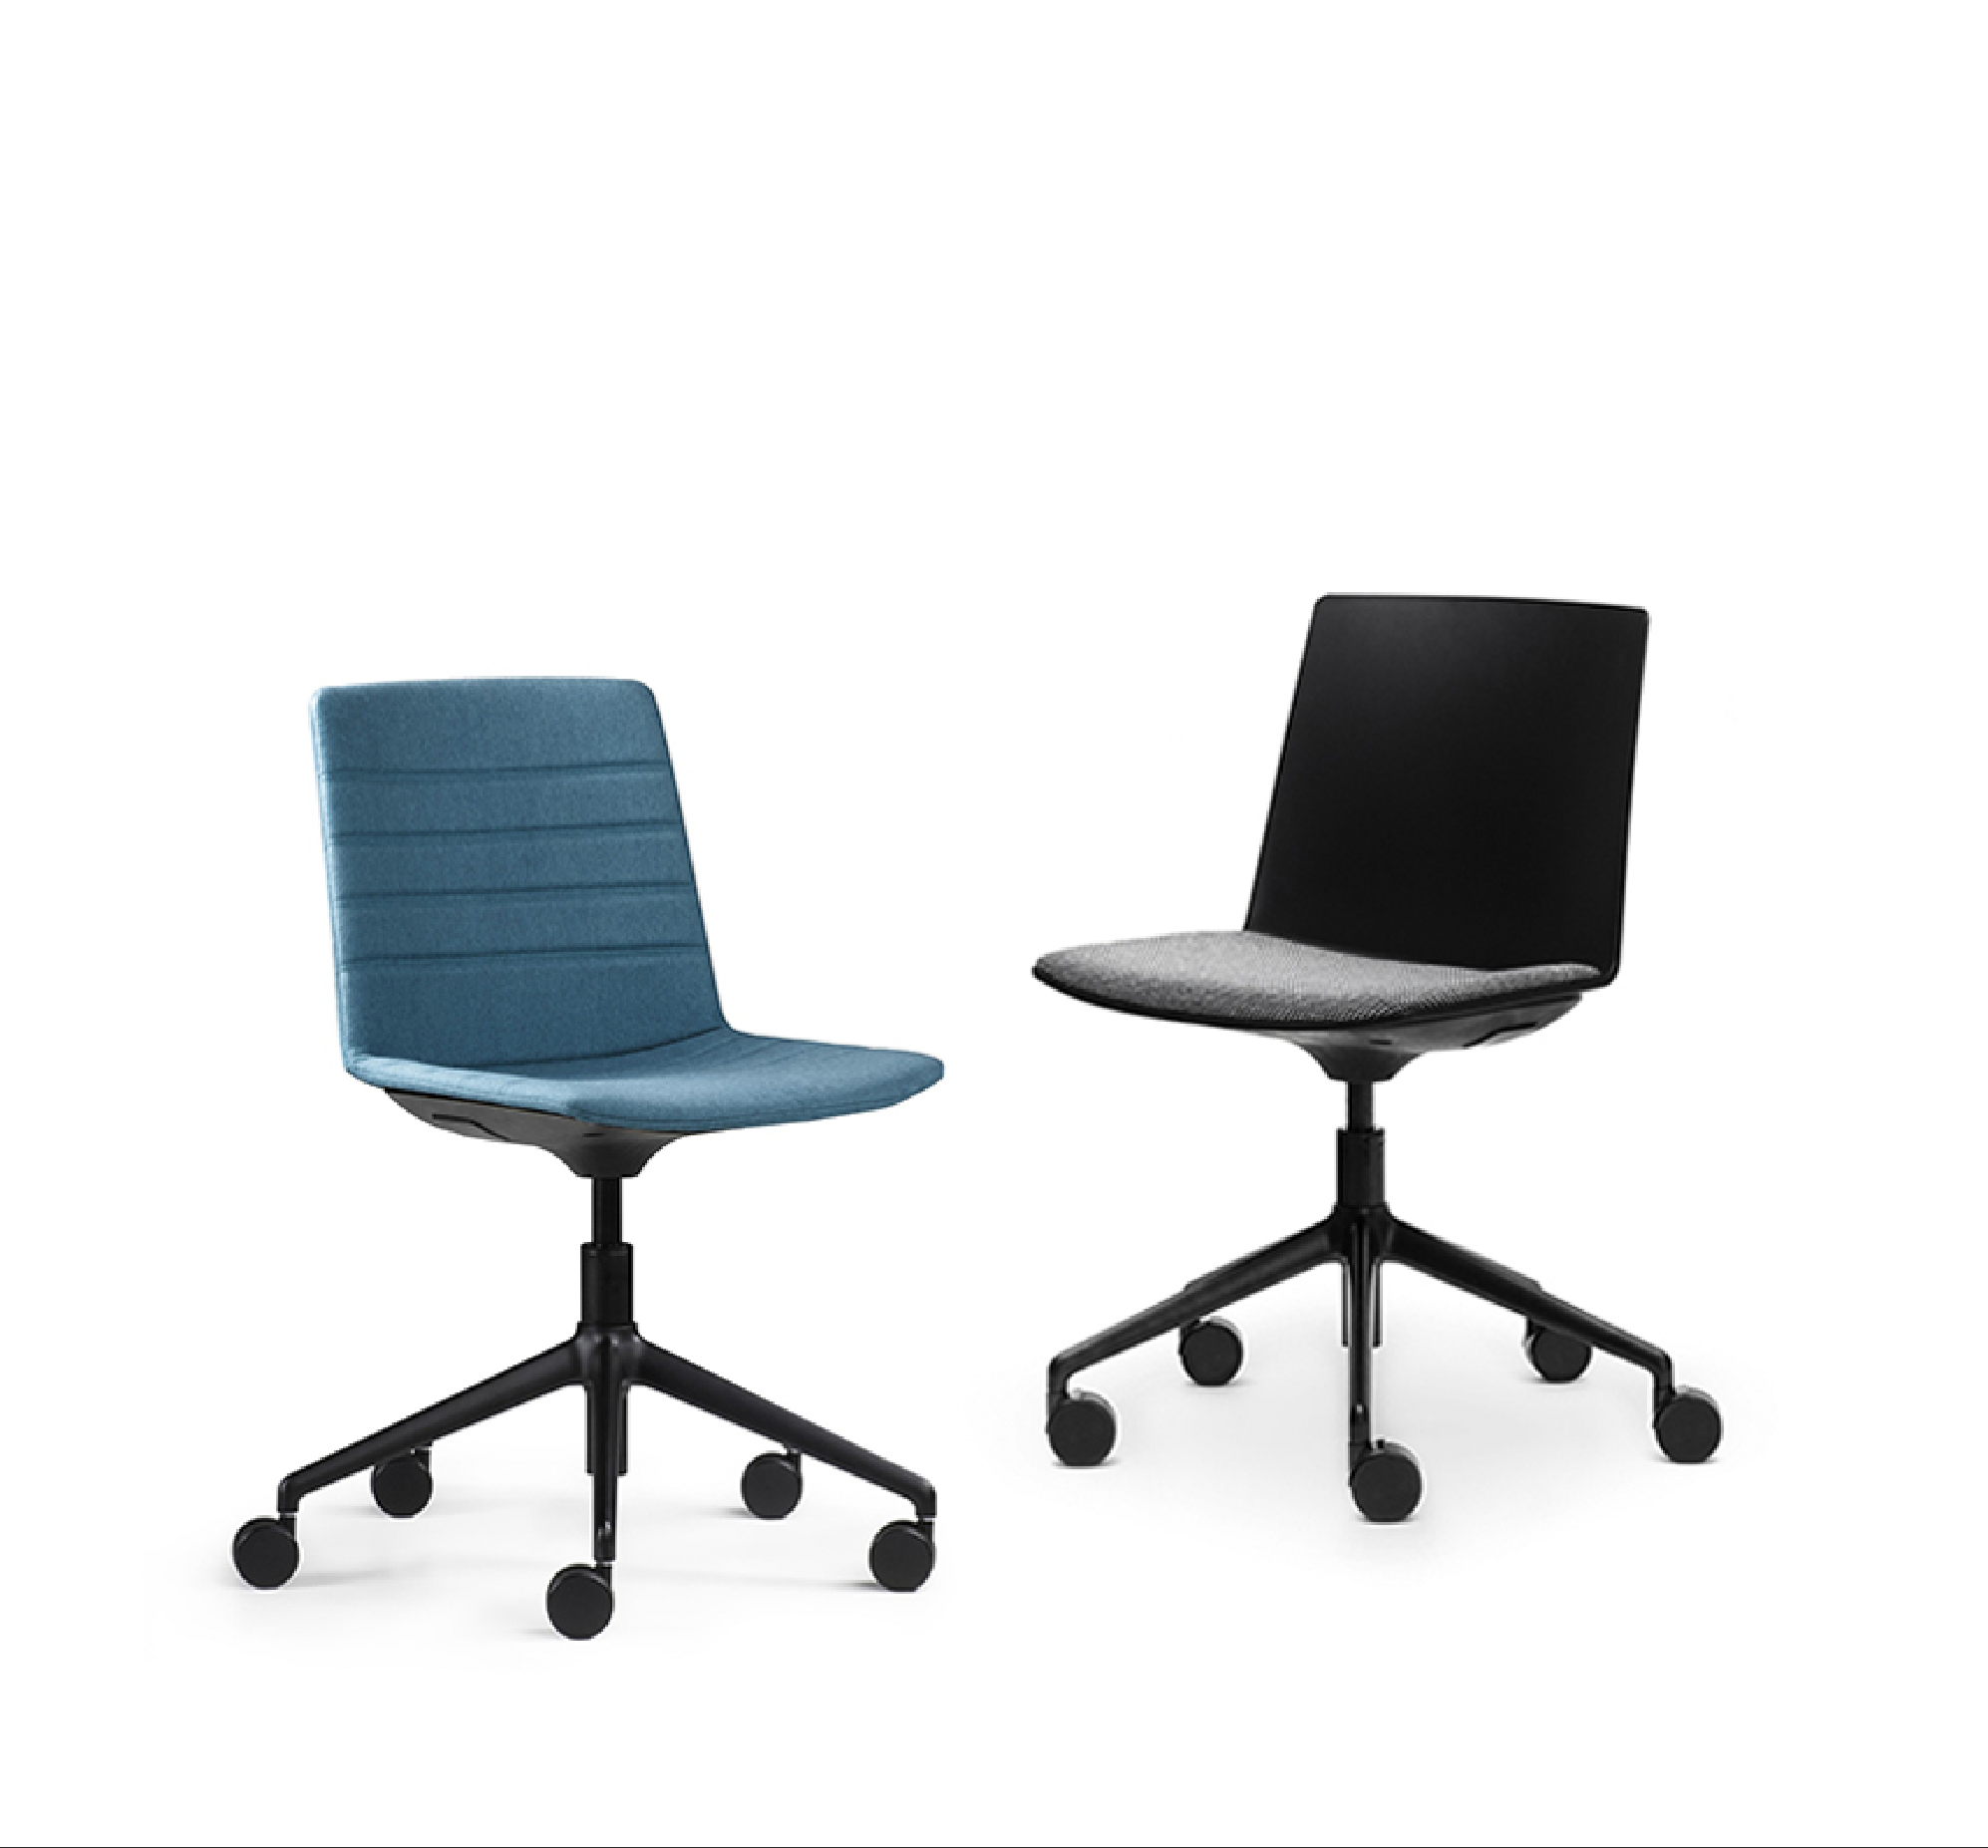 Chair Solutions Jubel Castor Base Chair